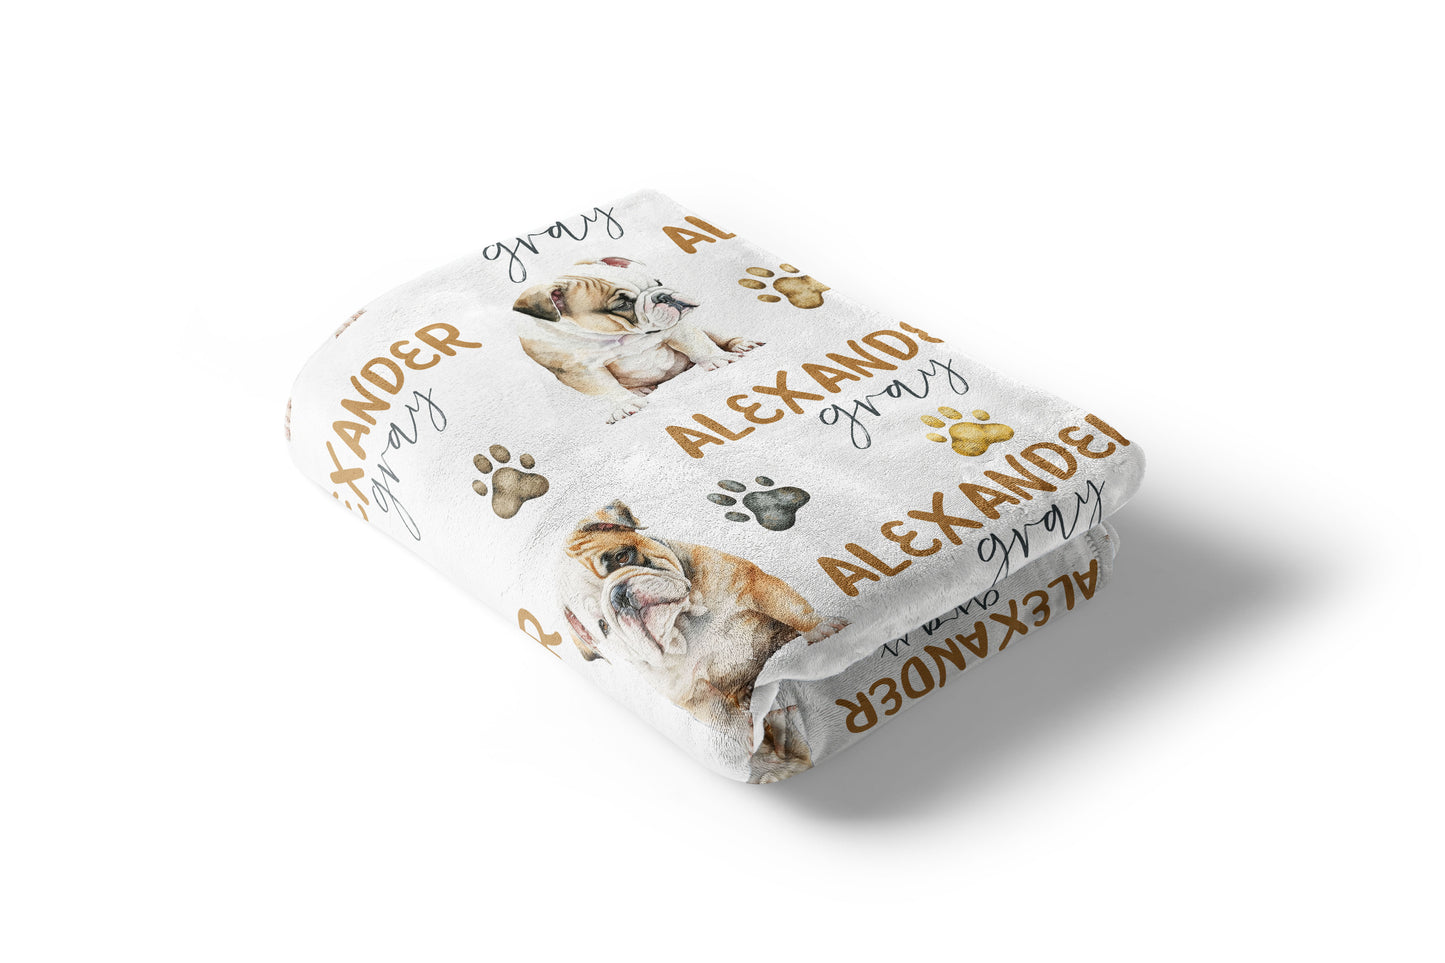 Personalized Puppy Bulldog Blanket, Dog Theme Bedding - Friends forever